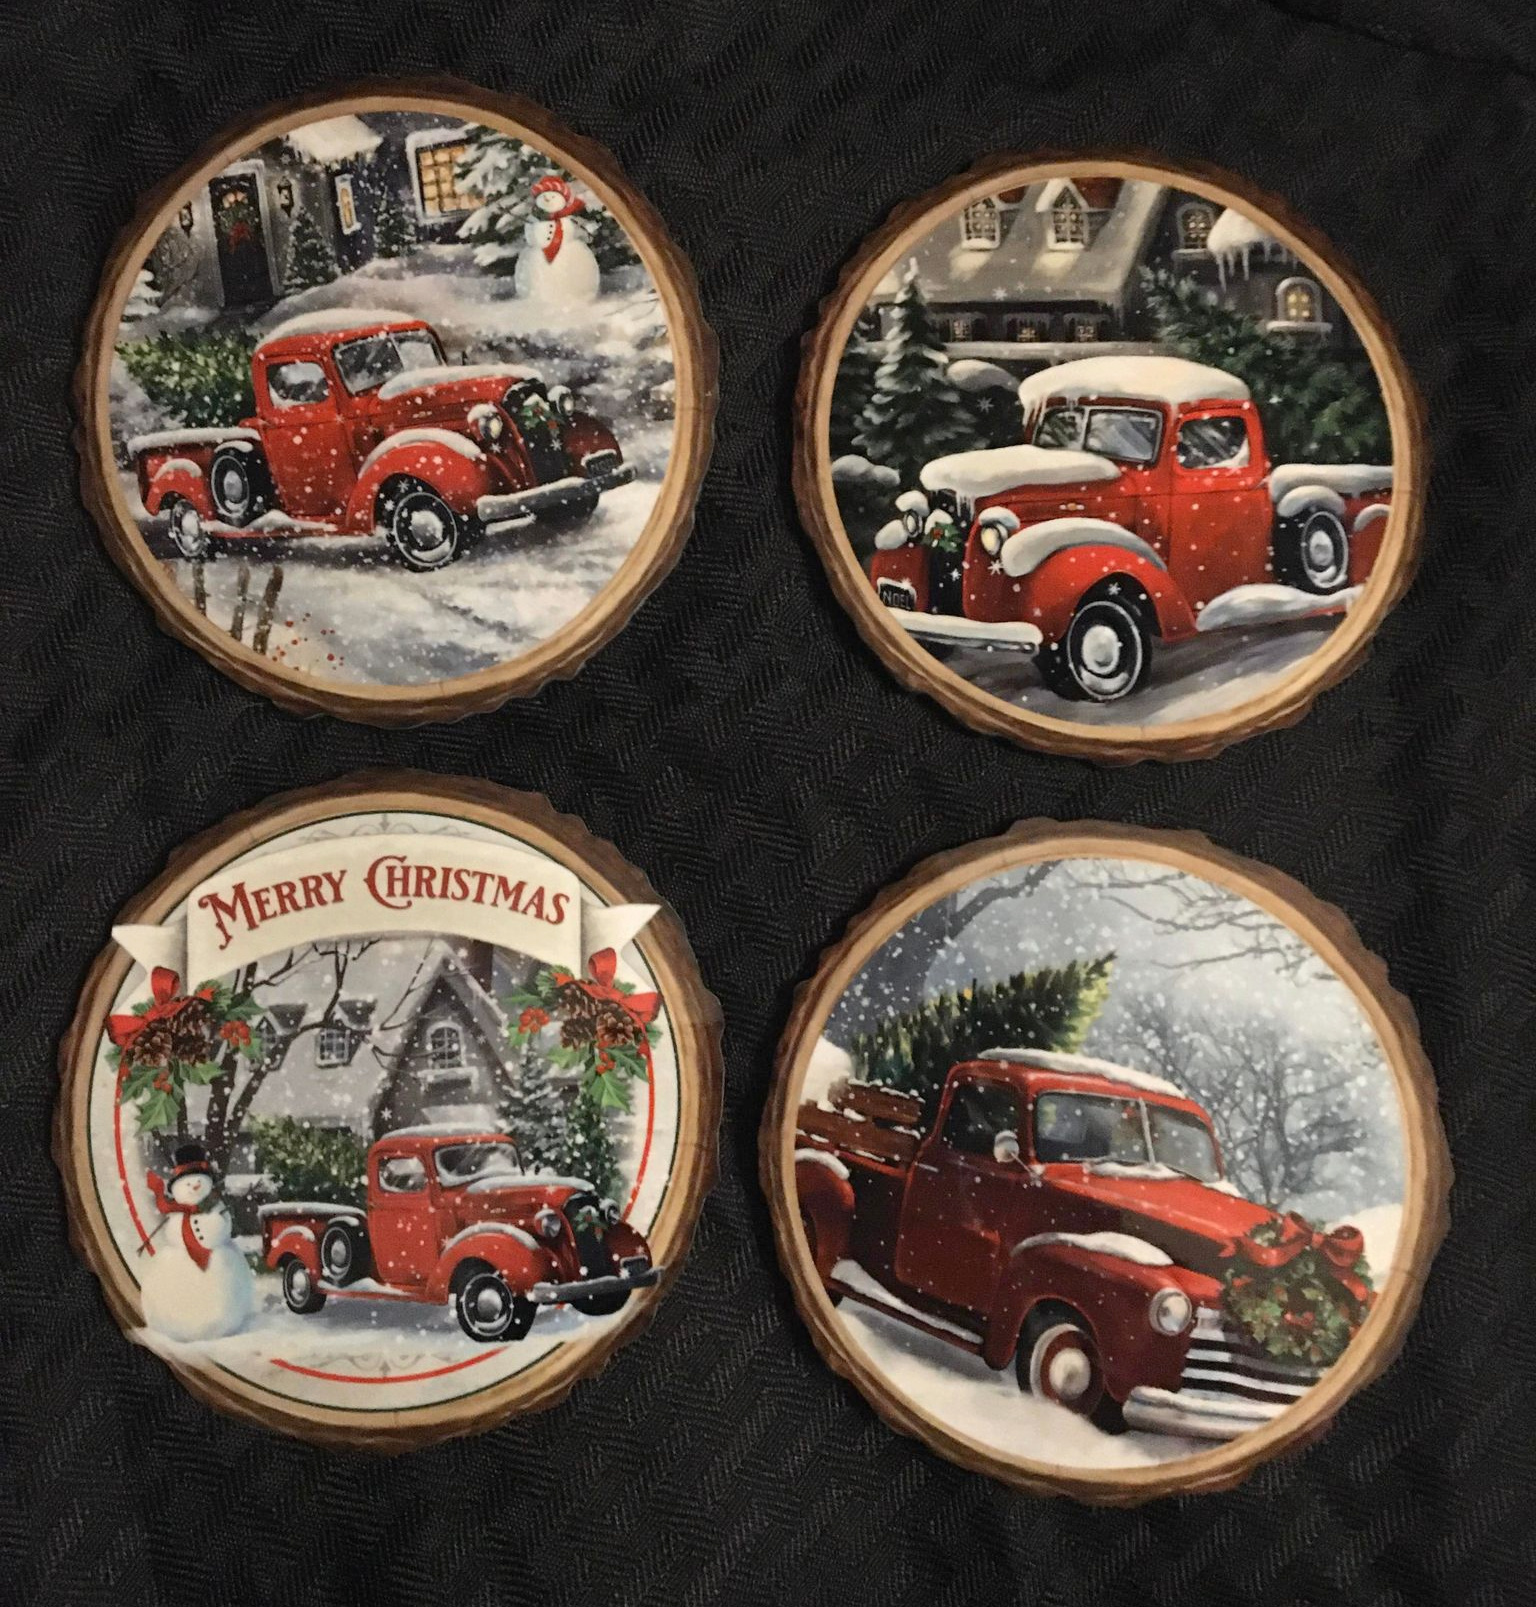 These coasters are so nice to give as gifts.   They sub beautifully and the cork backing is an 